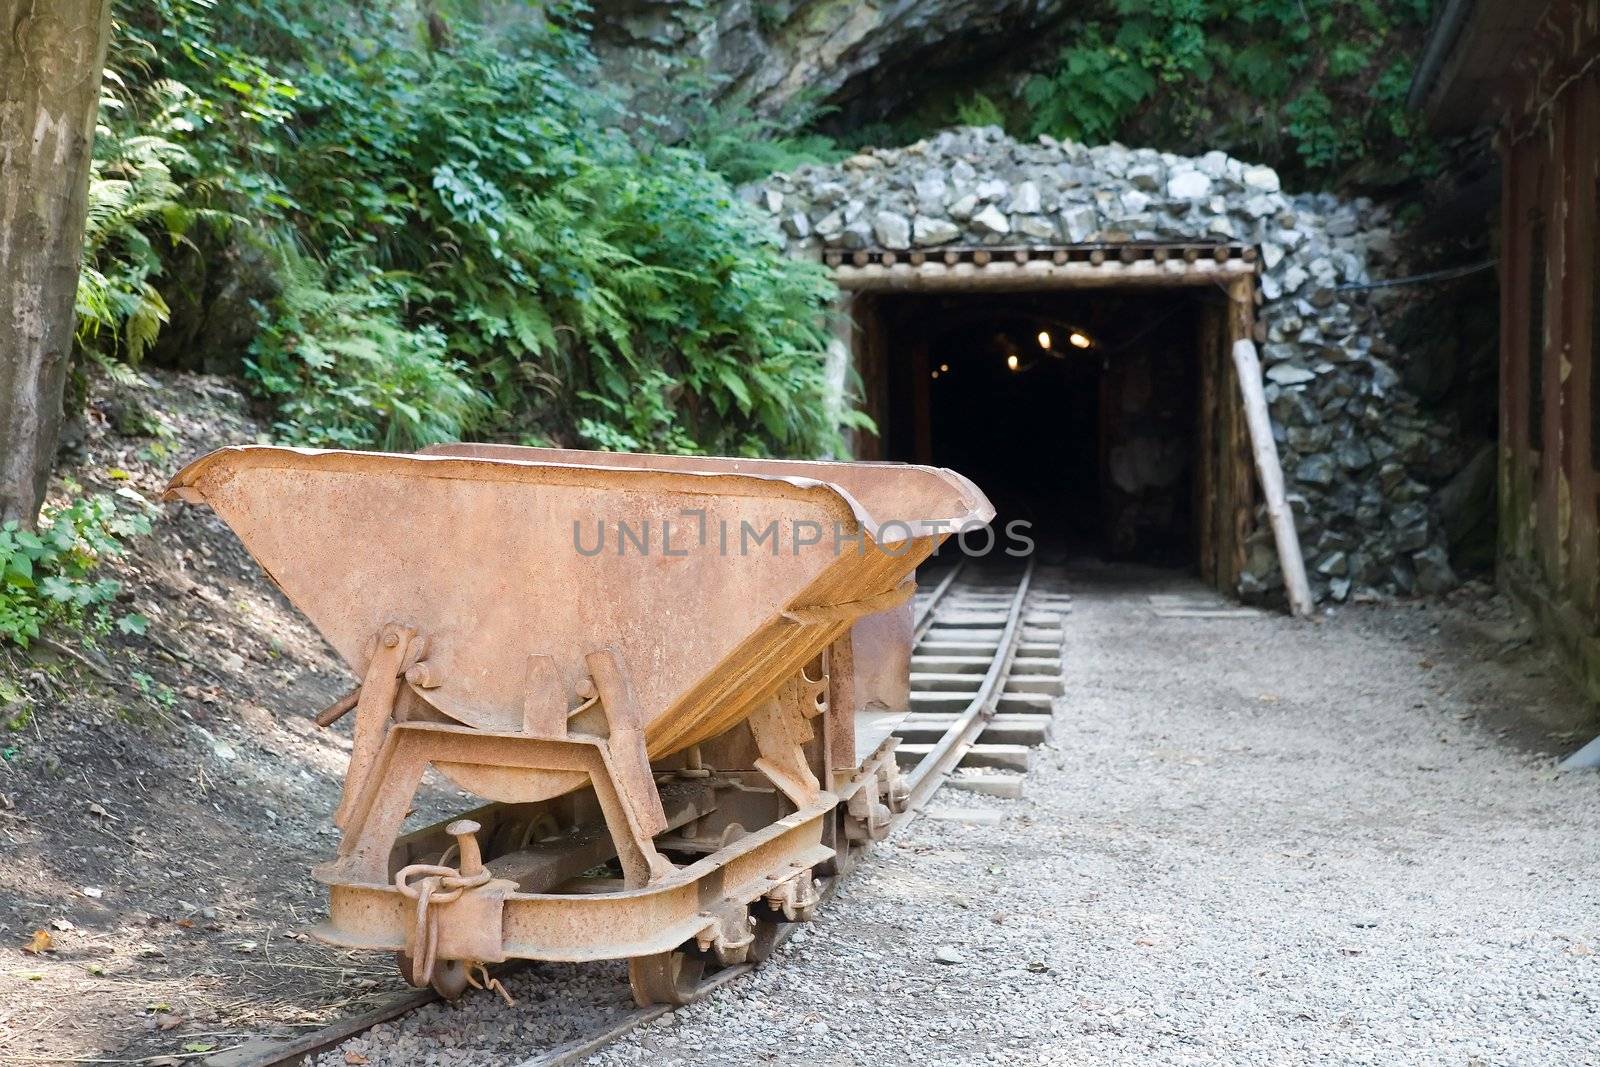 mine trolley standing in front of the old gold mine